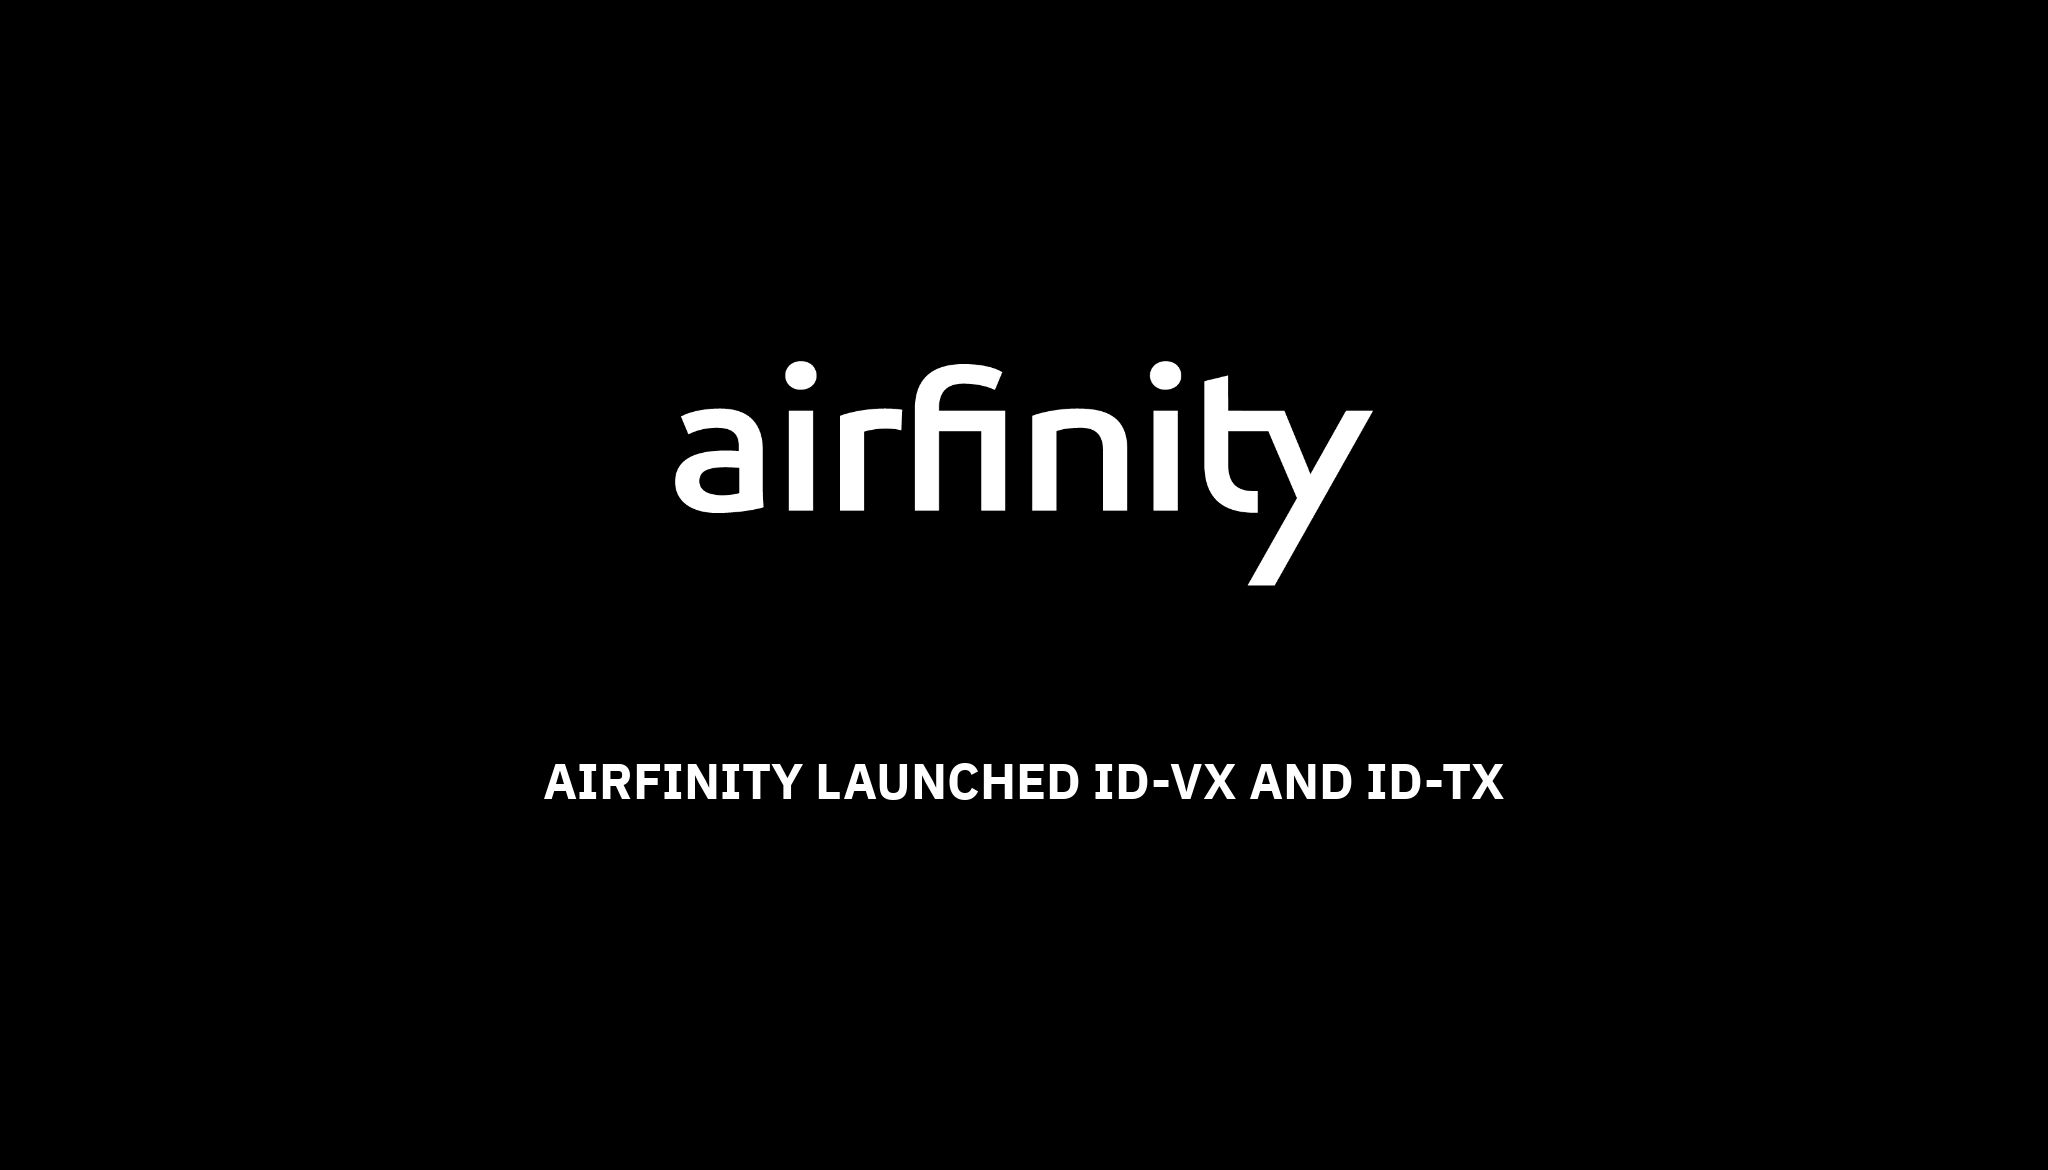 airfinity-launched-id-vx-and-id-tx-airfinity